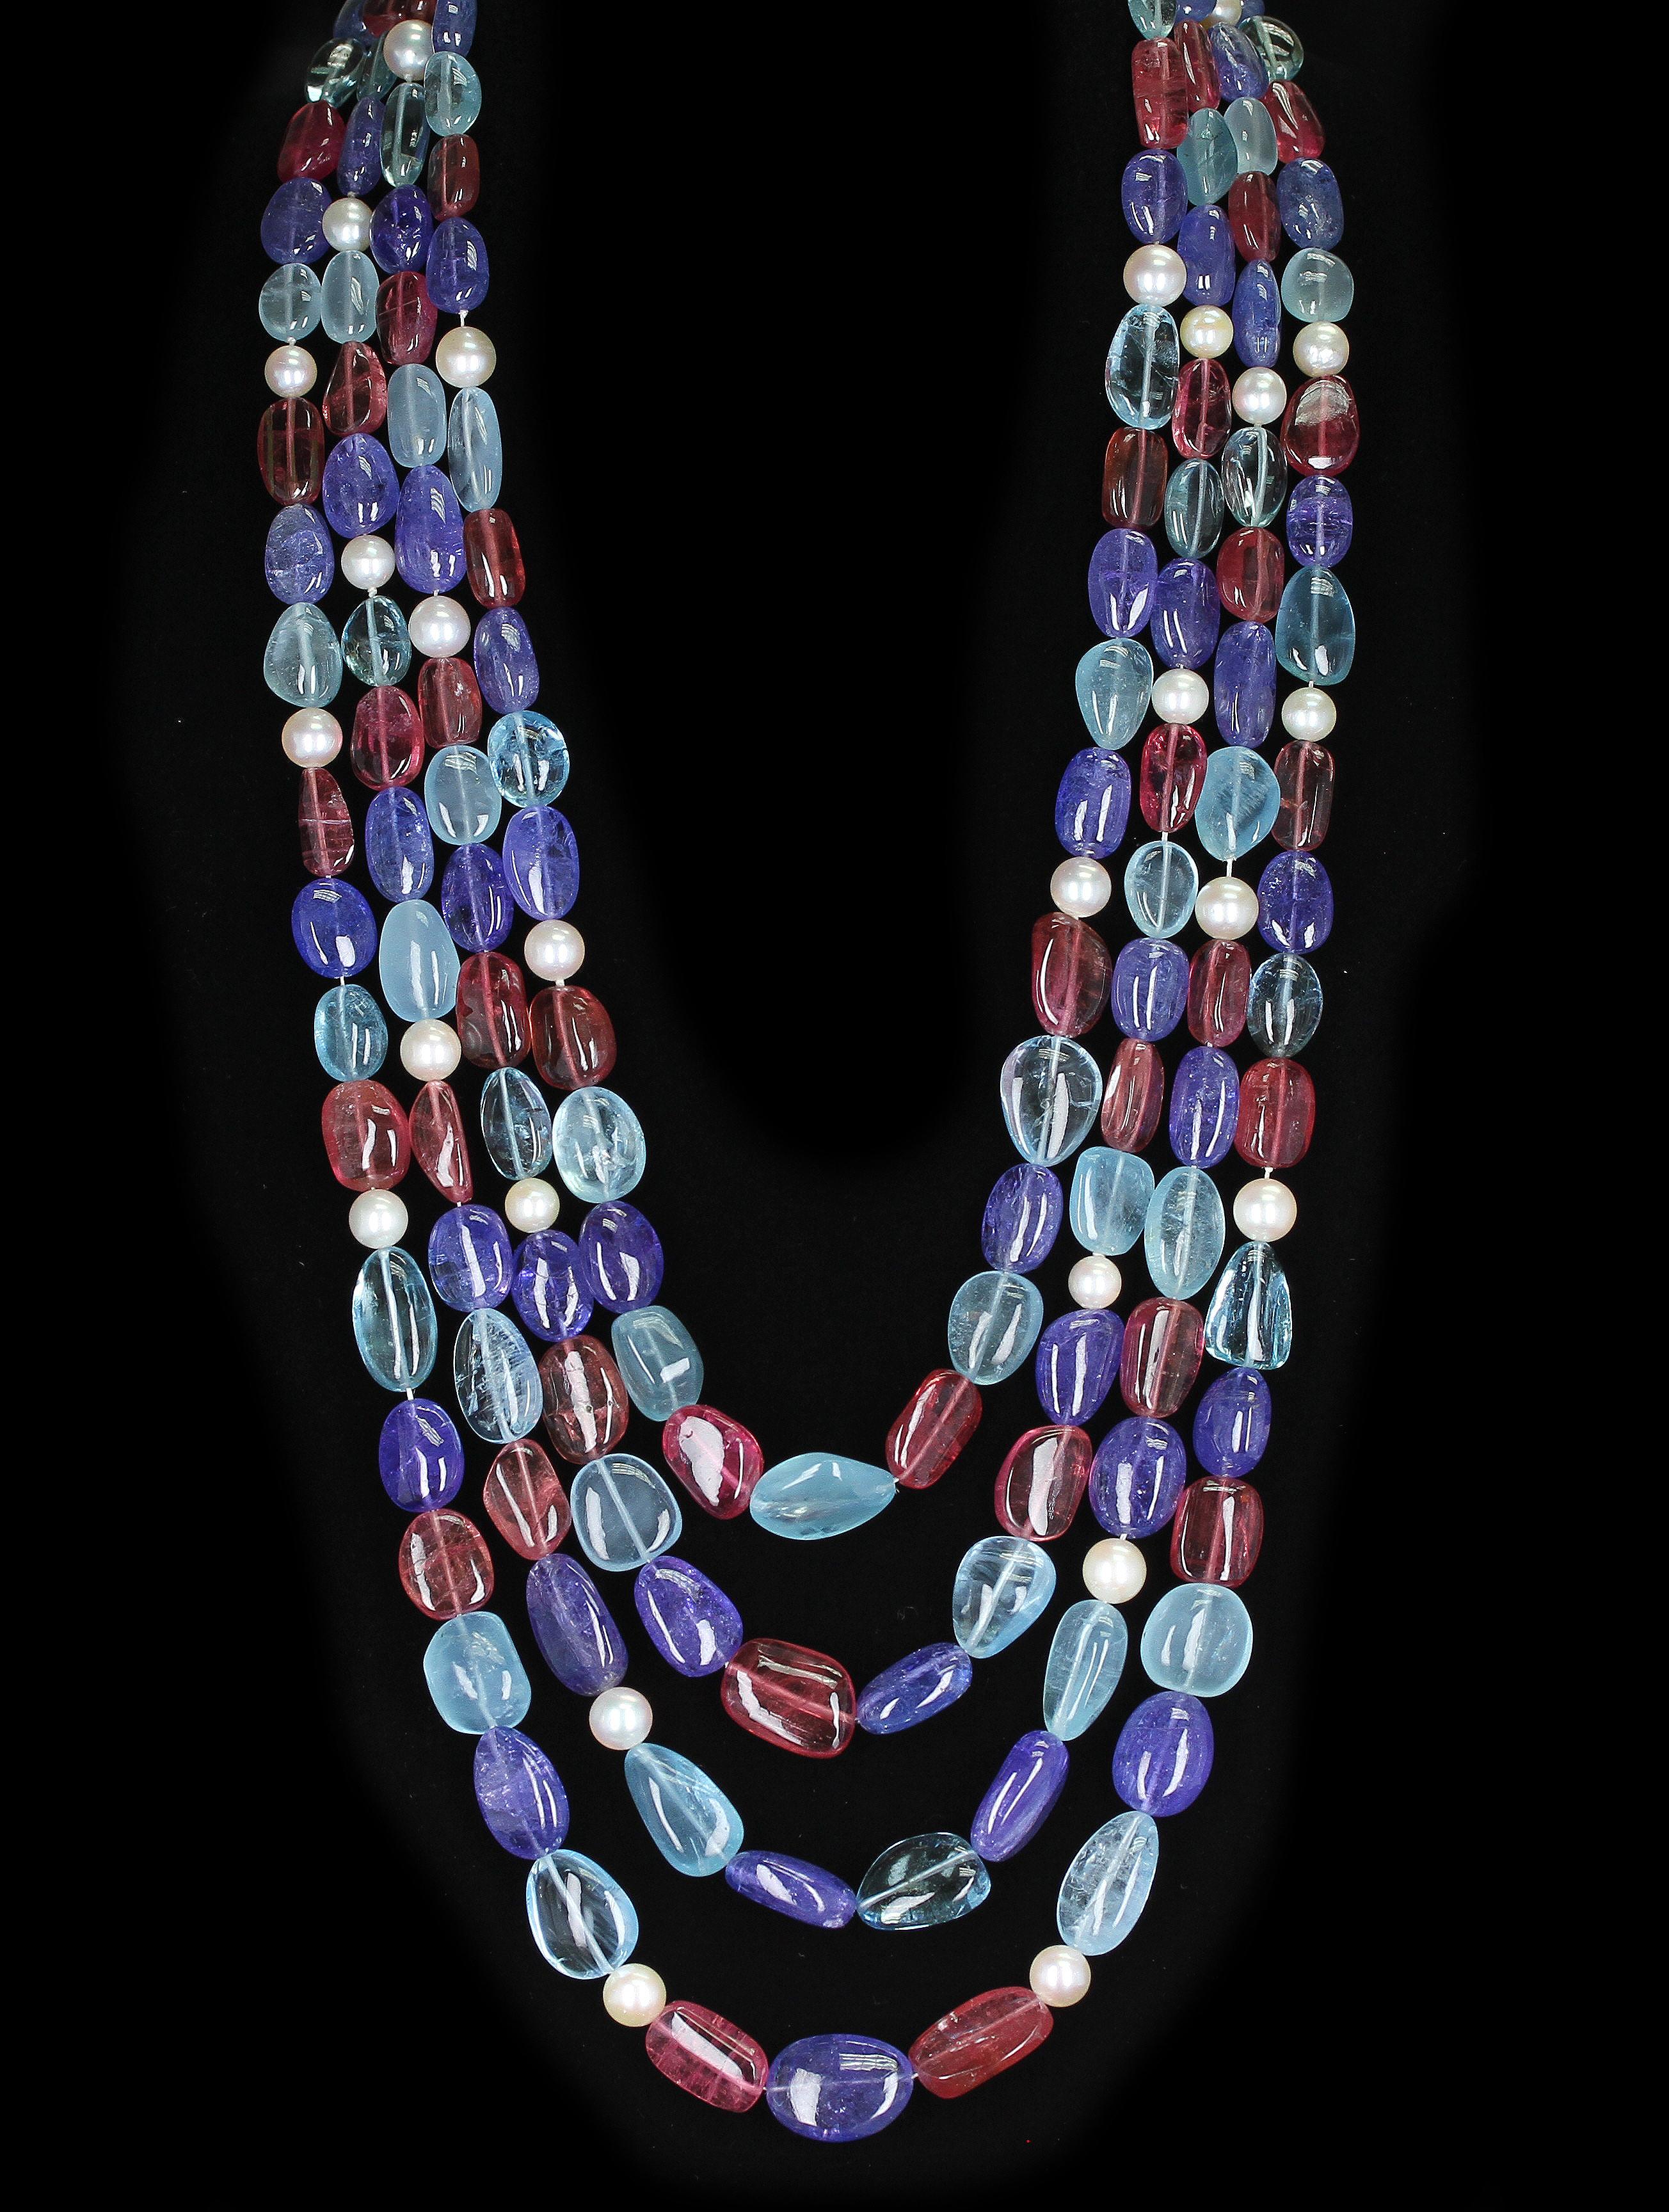 A candy-like three-strand necklace with smooth tumbled beads of Aquamarine, Tourmaline & Tanzanite with Pearls. The lengths of the strands range from 23